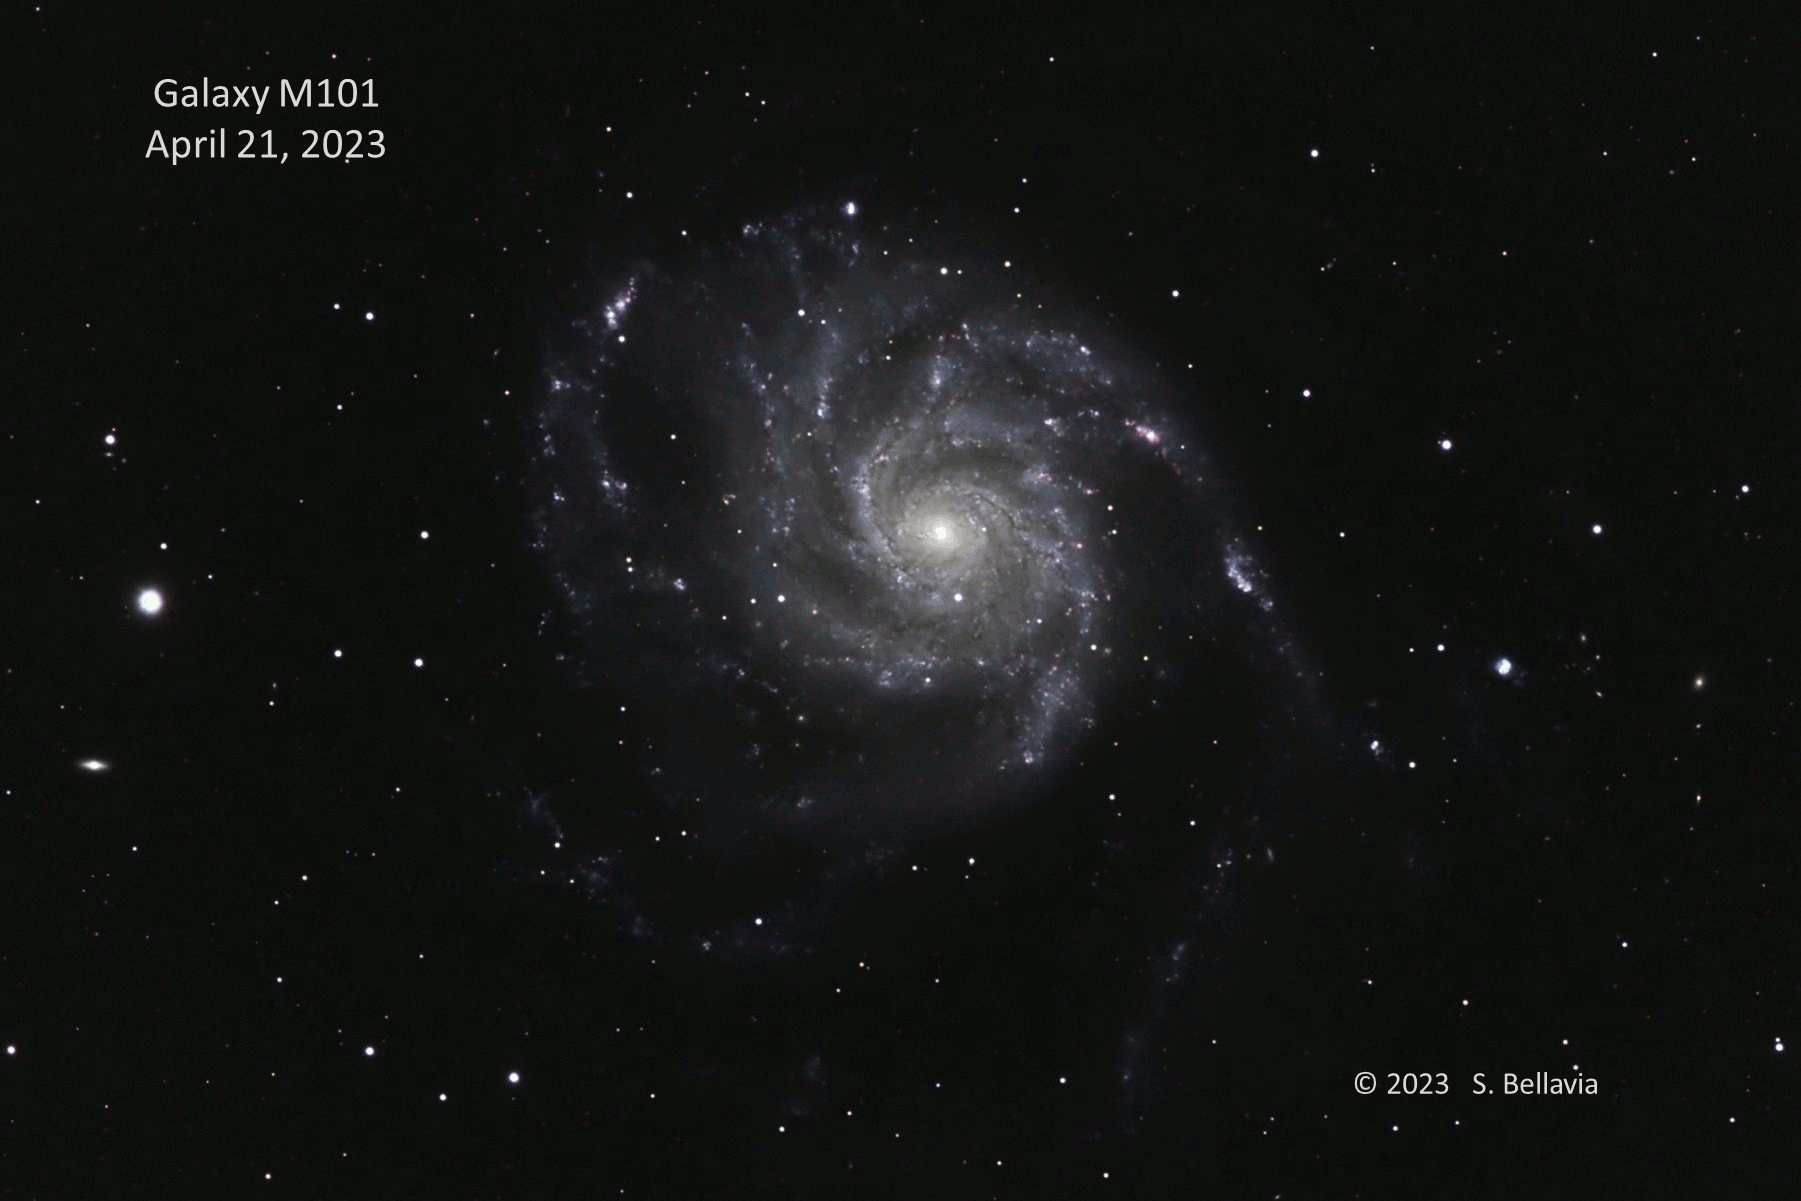 An animation showing a bright star appearing in a spiral galaxy.